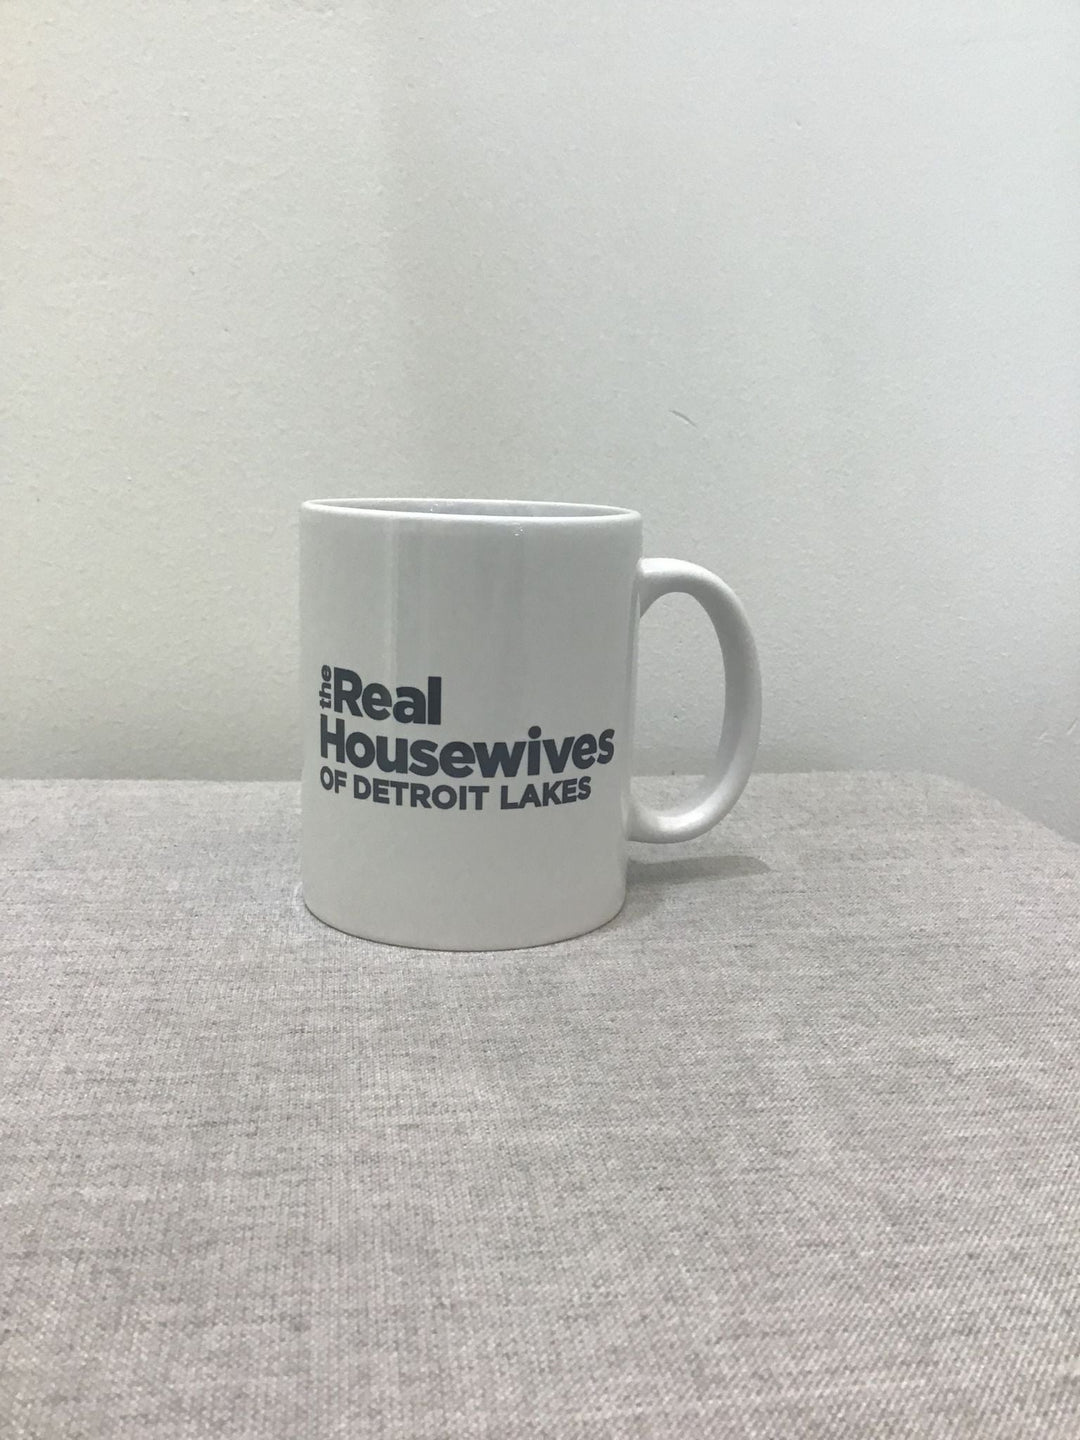 Go Jump In The Lake-Real Housewives of Detroit Lakes Mug - Leela and Lavender